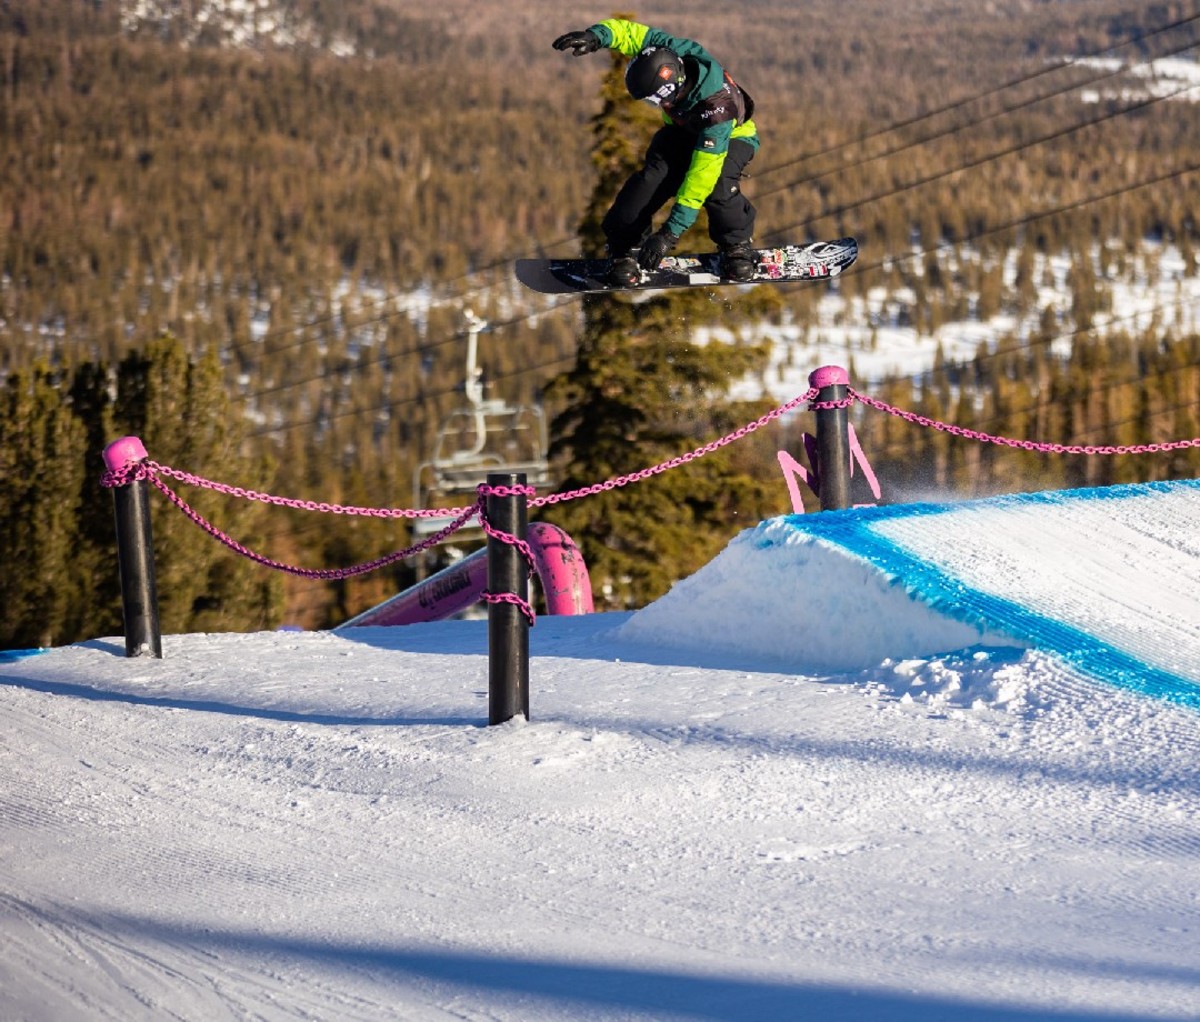 Red Gerard performs a backside 270 over the chain links during his US Grand Prix run at Mammoth